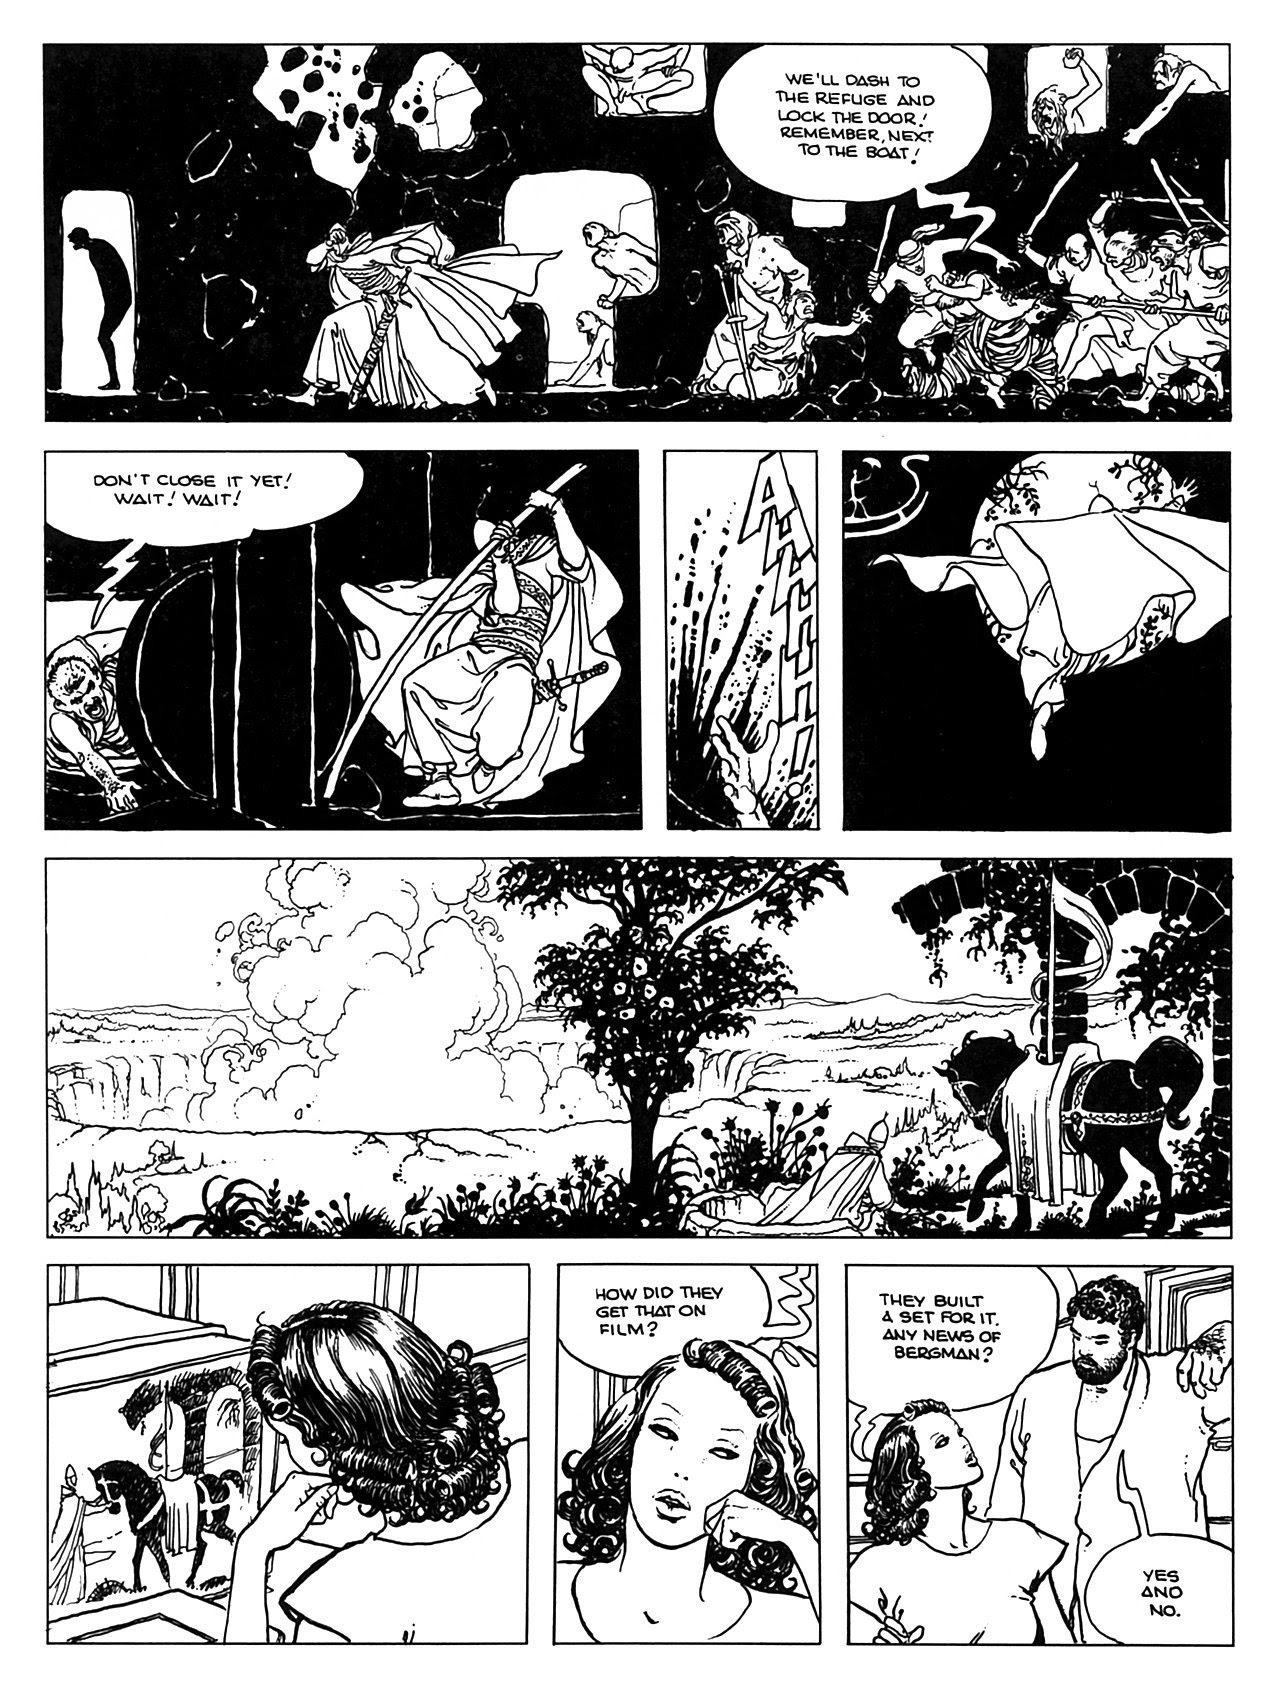 Read online Perchance to dream - The Indian adventures of Giuseppe Bergman comic -  Issue # TPB - 55